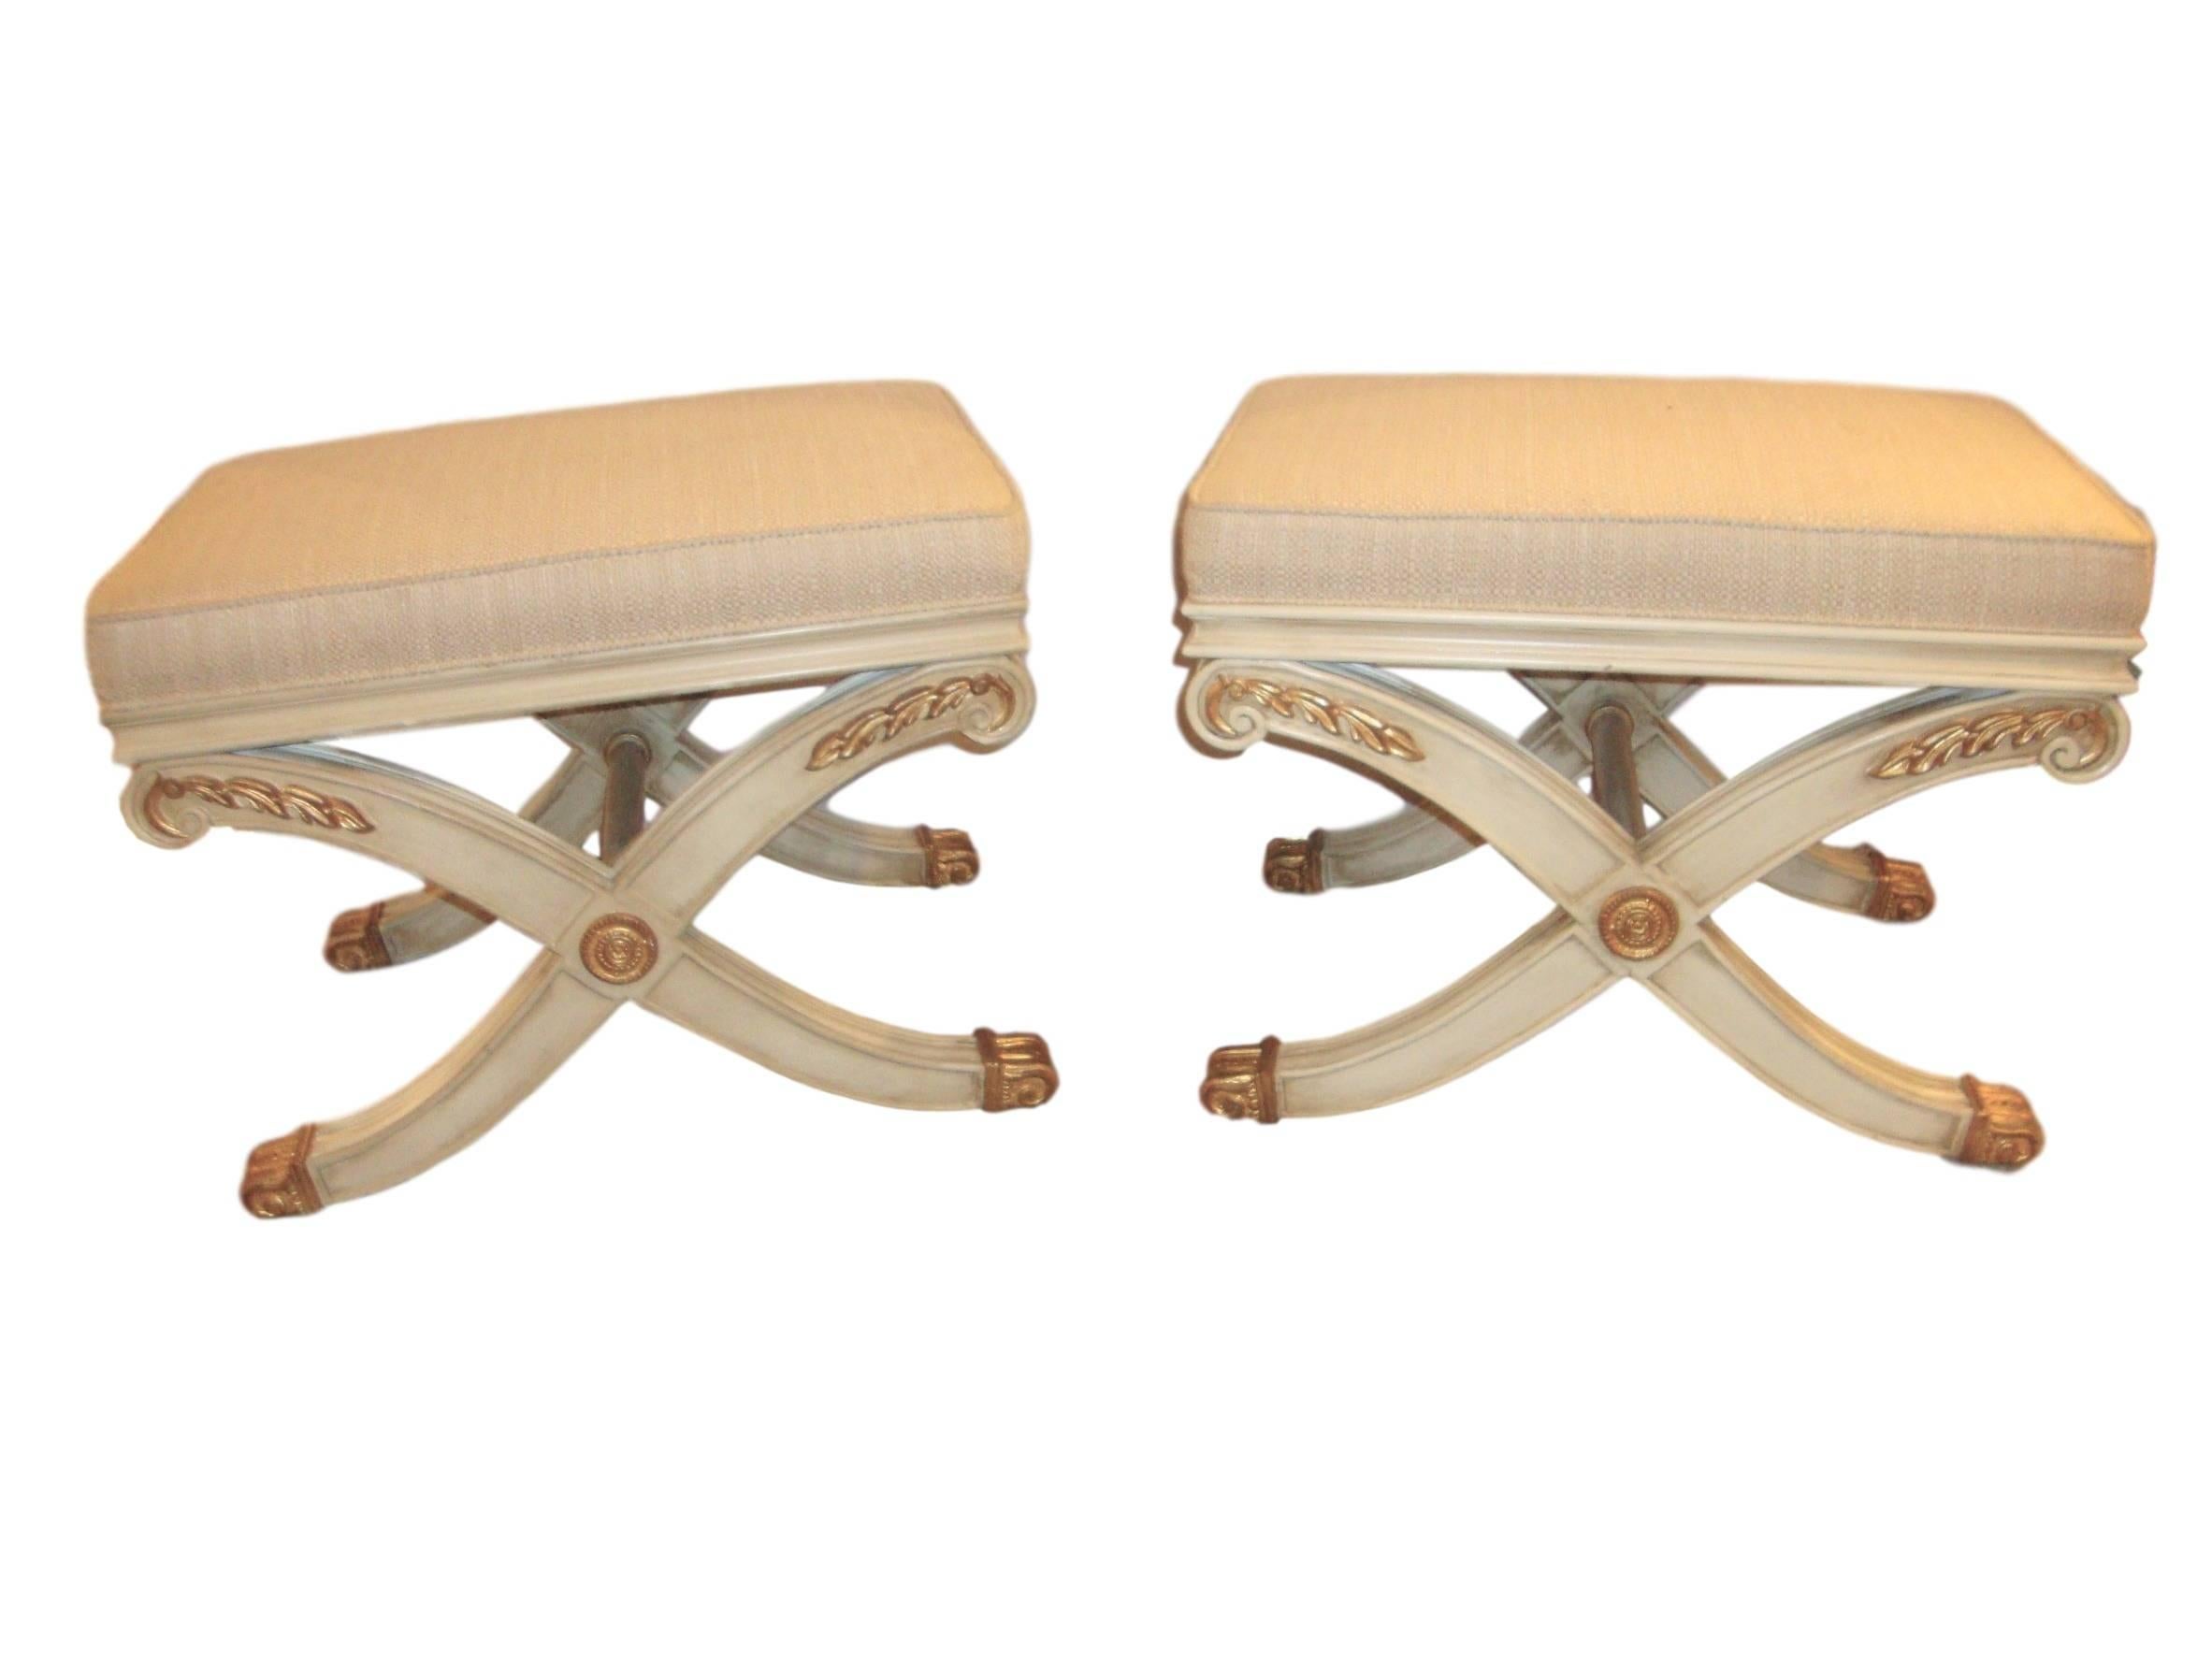 Pair of Maison Jansen style X-form benches. Pair of parcel-gilt and paint decorated X-shaped benches or footstools in the manner of Maison Jansen.